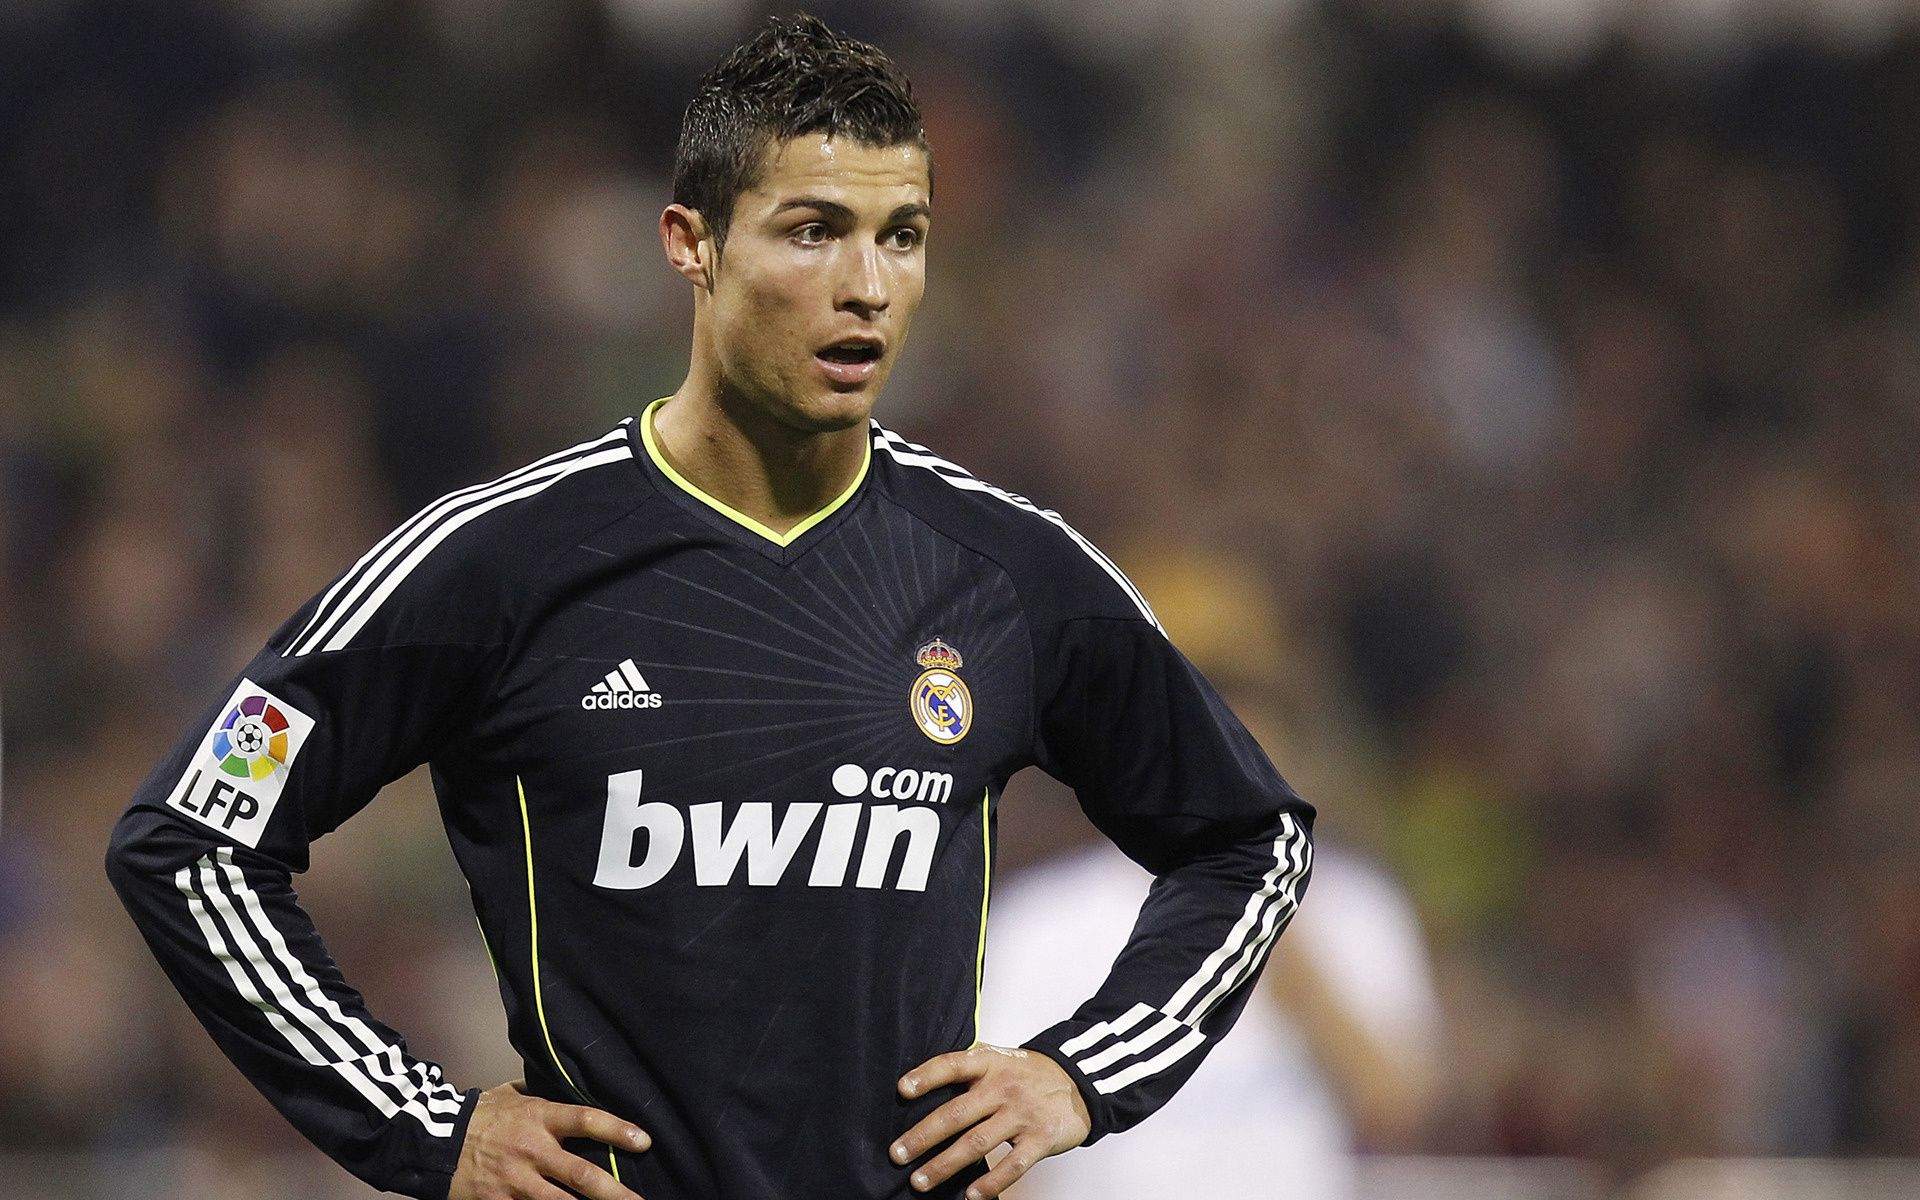 Sport Cristiano Ronaldo Wallpapers Photo With Ronaldo In Real Life